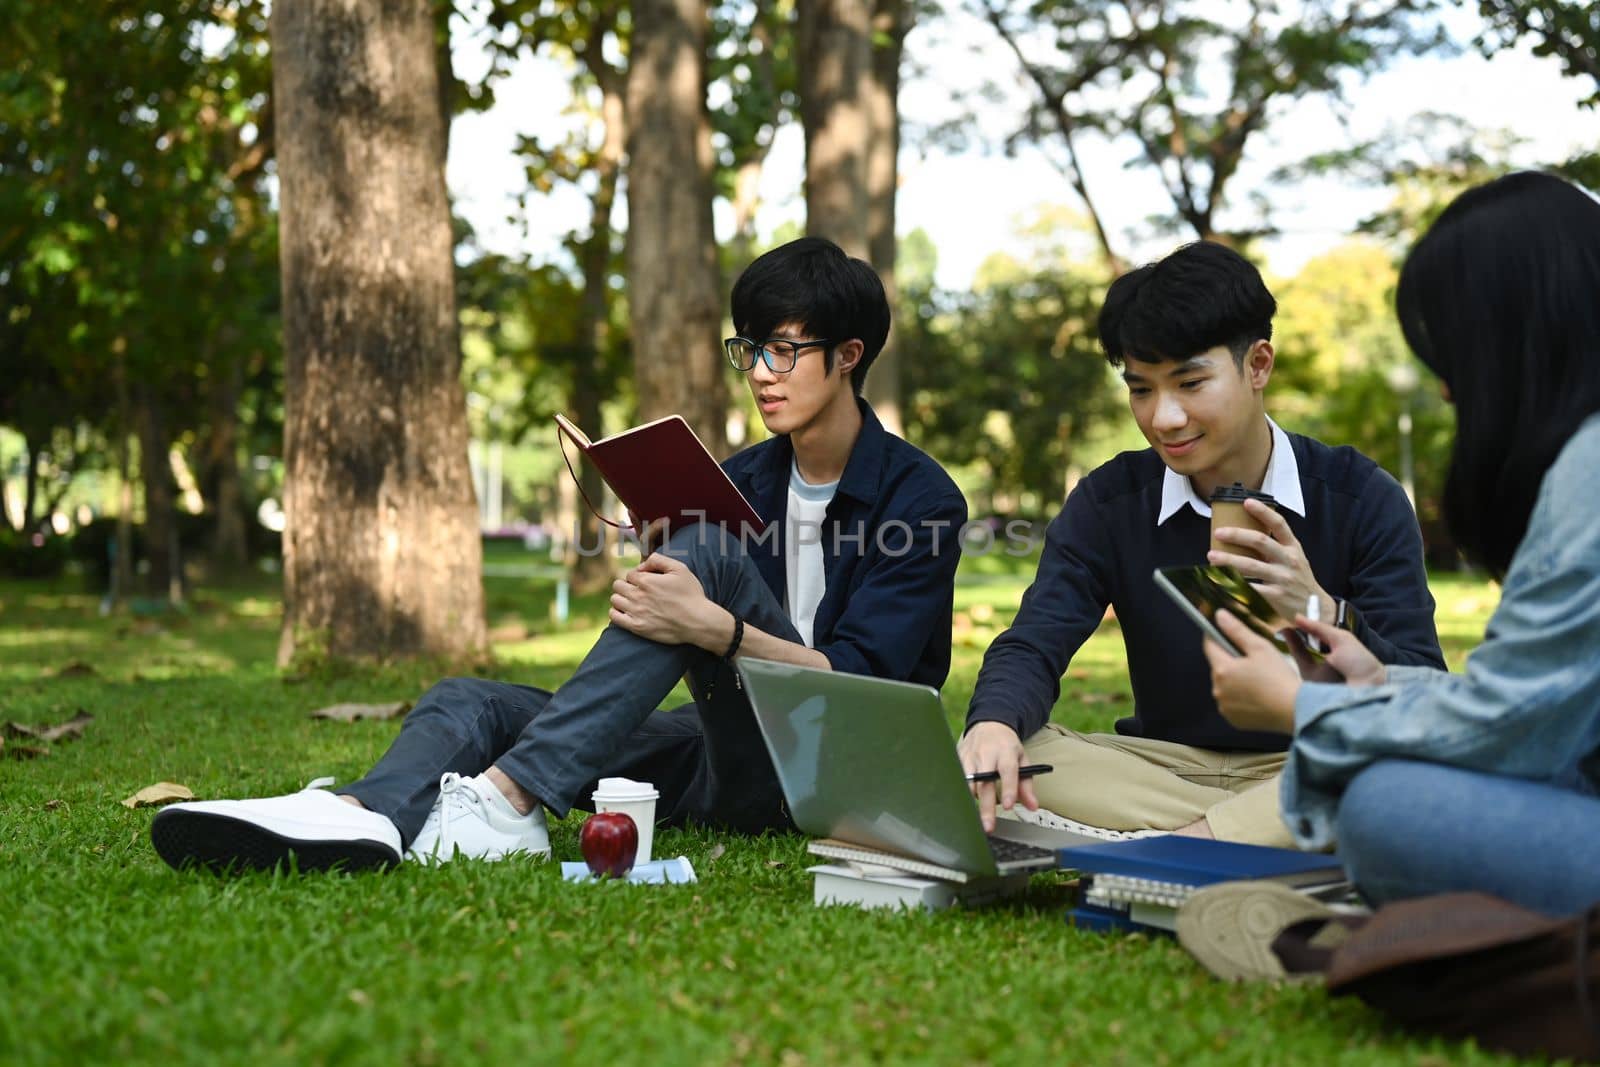 Group of university students talking, relaxing on campus lawn and working on laptop together. Education and lifestyle concept by prathanchorruangsak